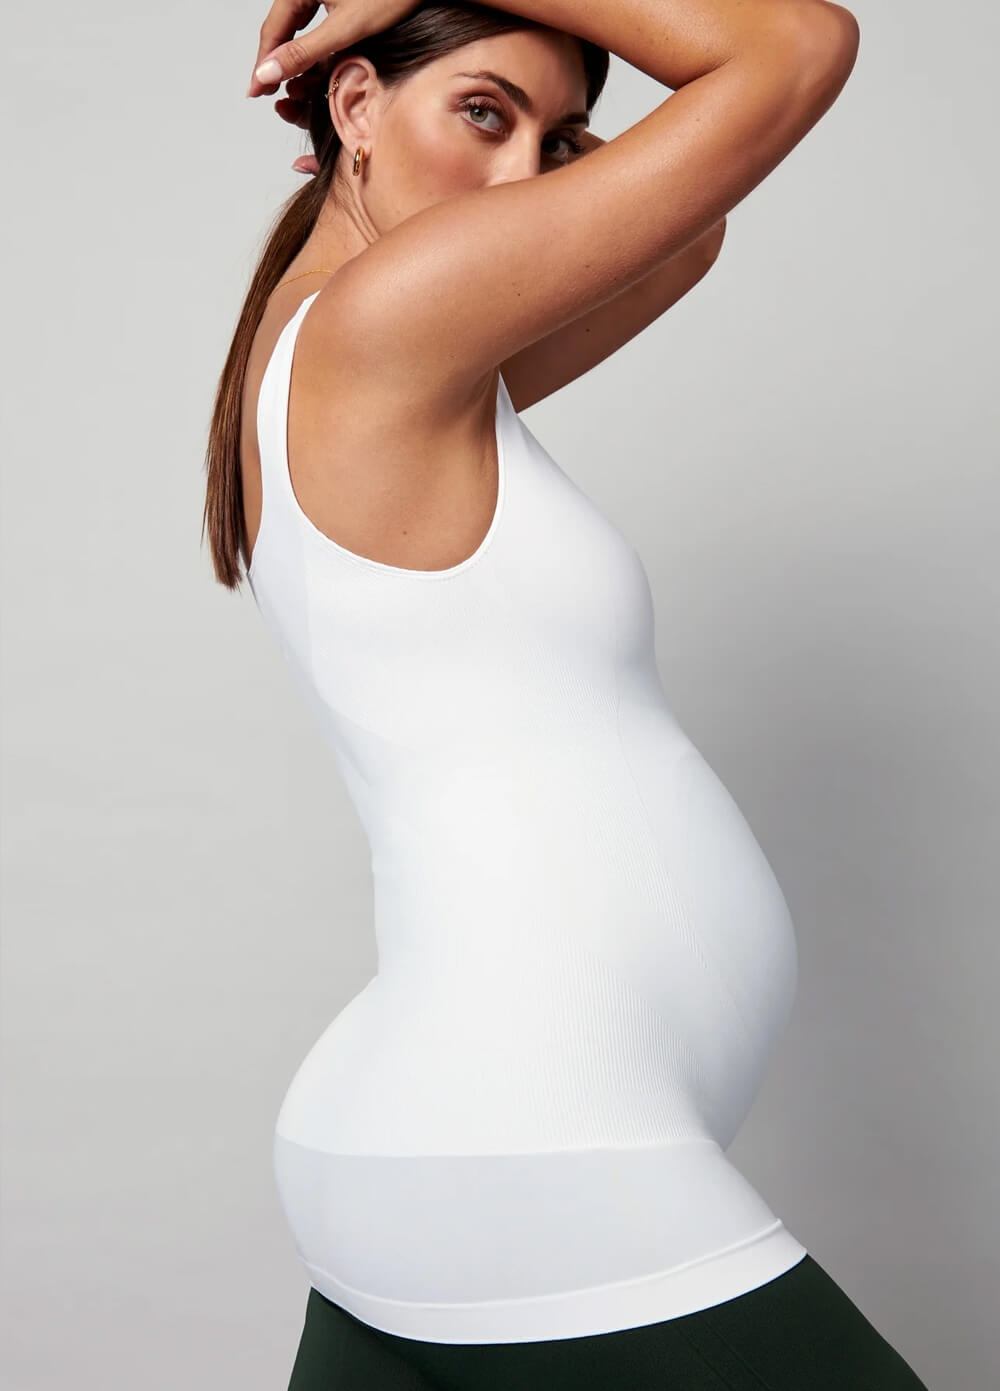 Blanqi - BodyStyler Belly Support Tank Top in White